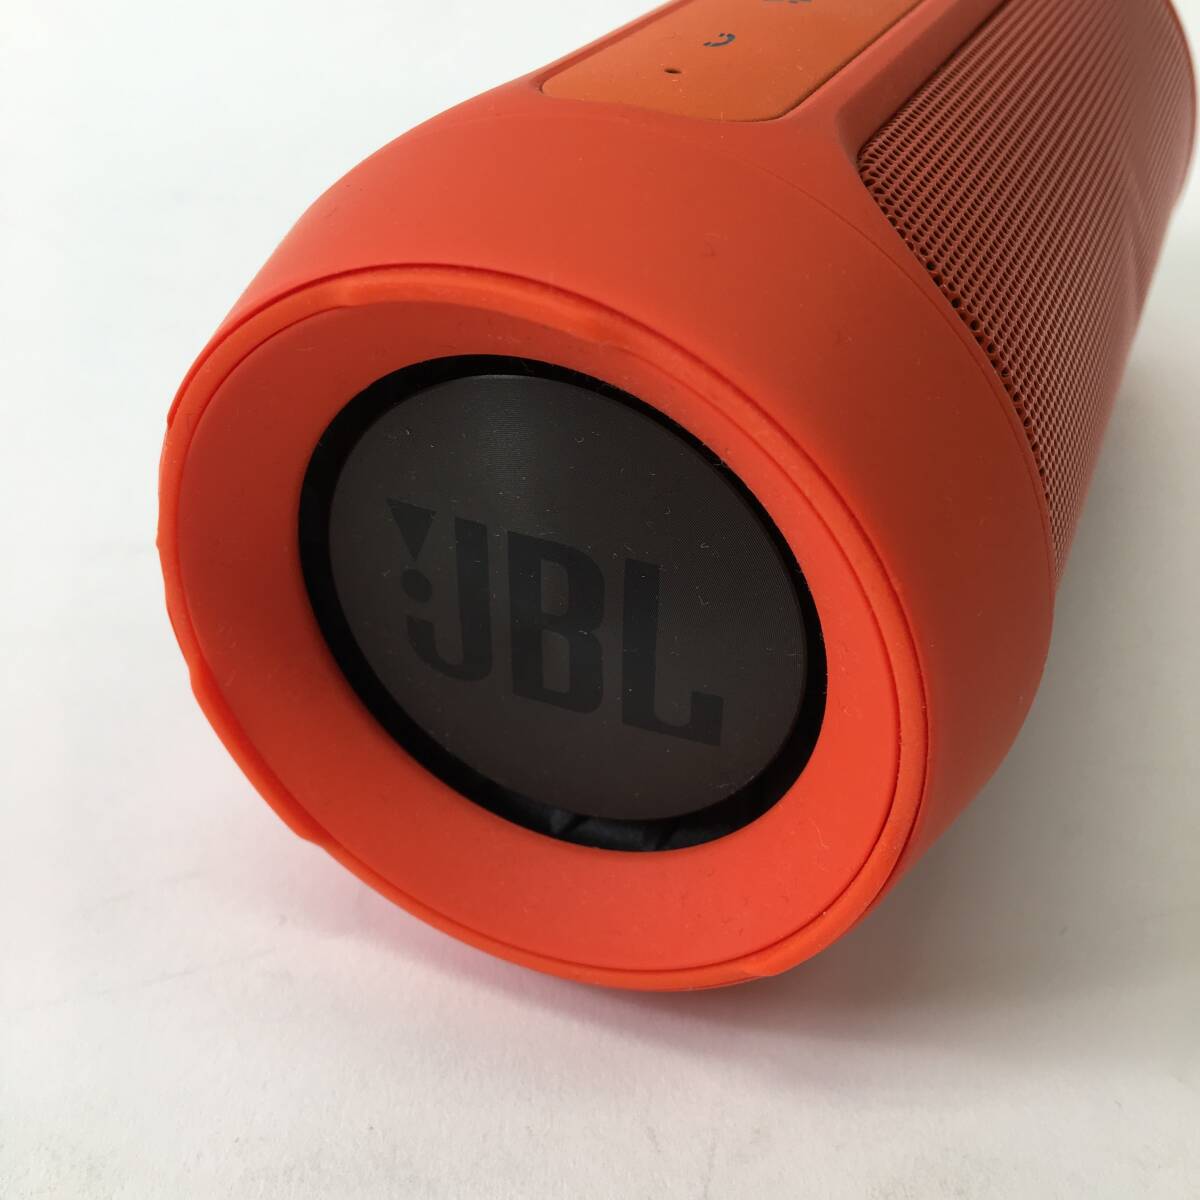 JBL Charge2+ スピーカー Bluetooth IPX5防水機能 コンパクト 音出し確認済 オレンジ 24c菊E_画像3